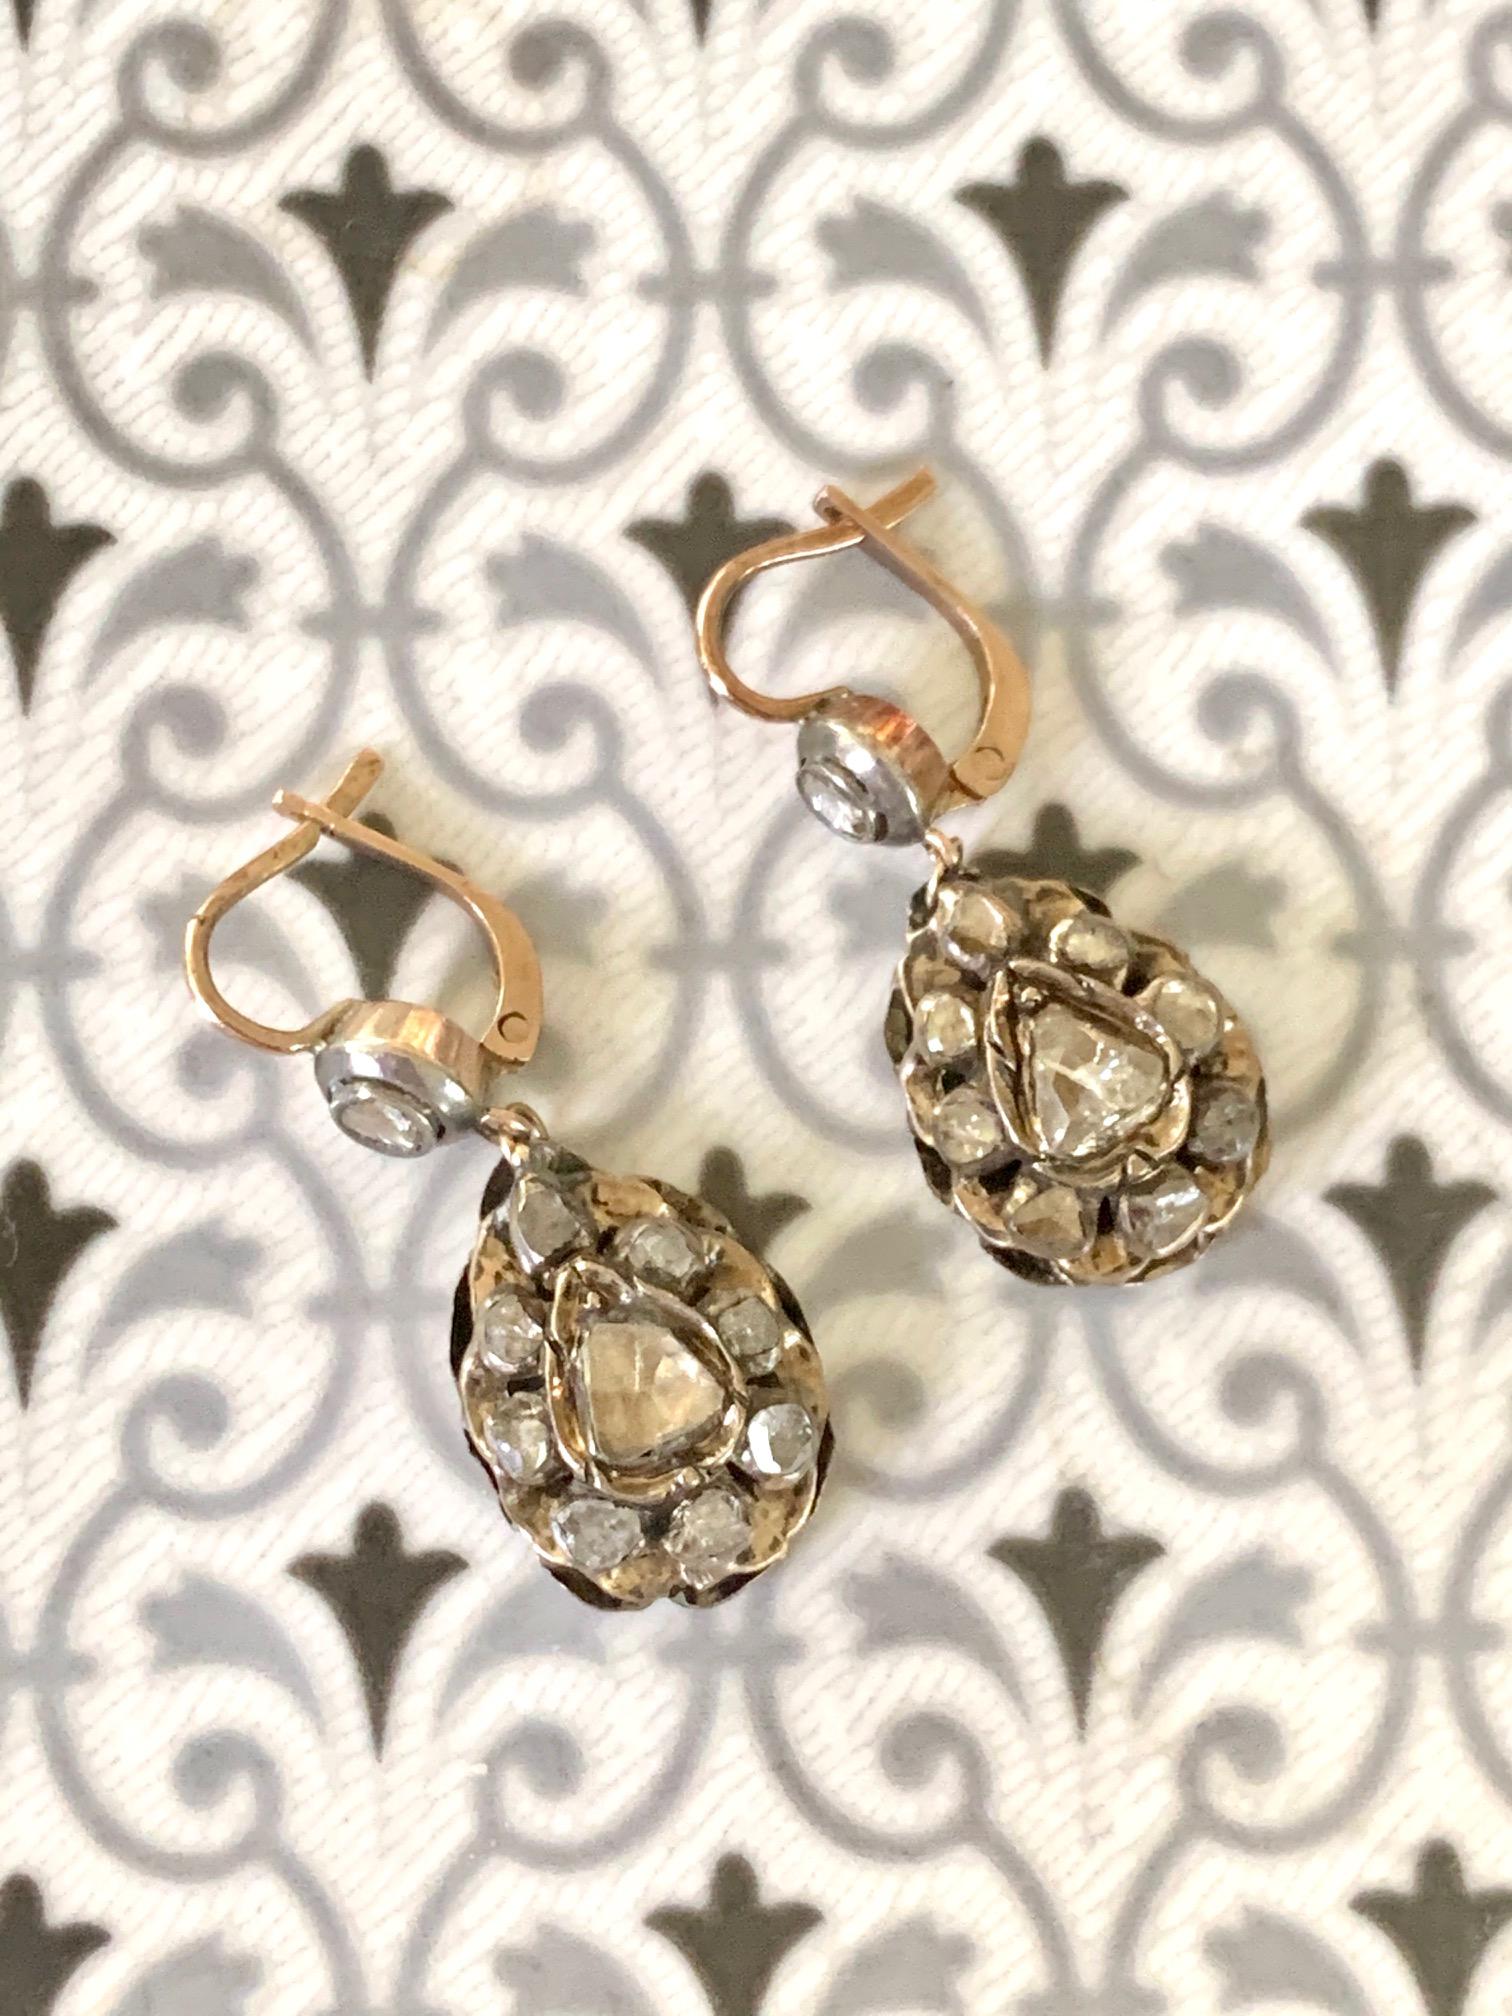 These lovely antique Diamond drop earrings feature several rose cut Diamonds on each earring.  They are set in 9 kart Gold and Silver.  The closure is a French hook for extra security.

Length:  1 1/4